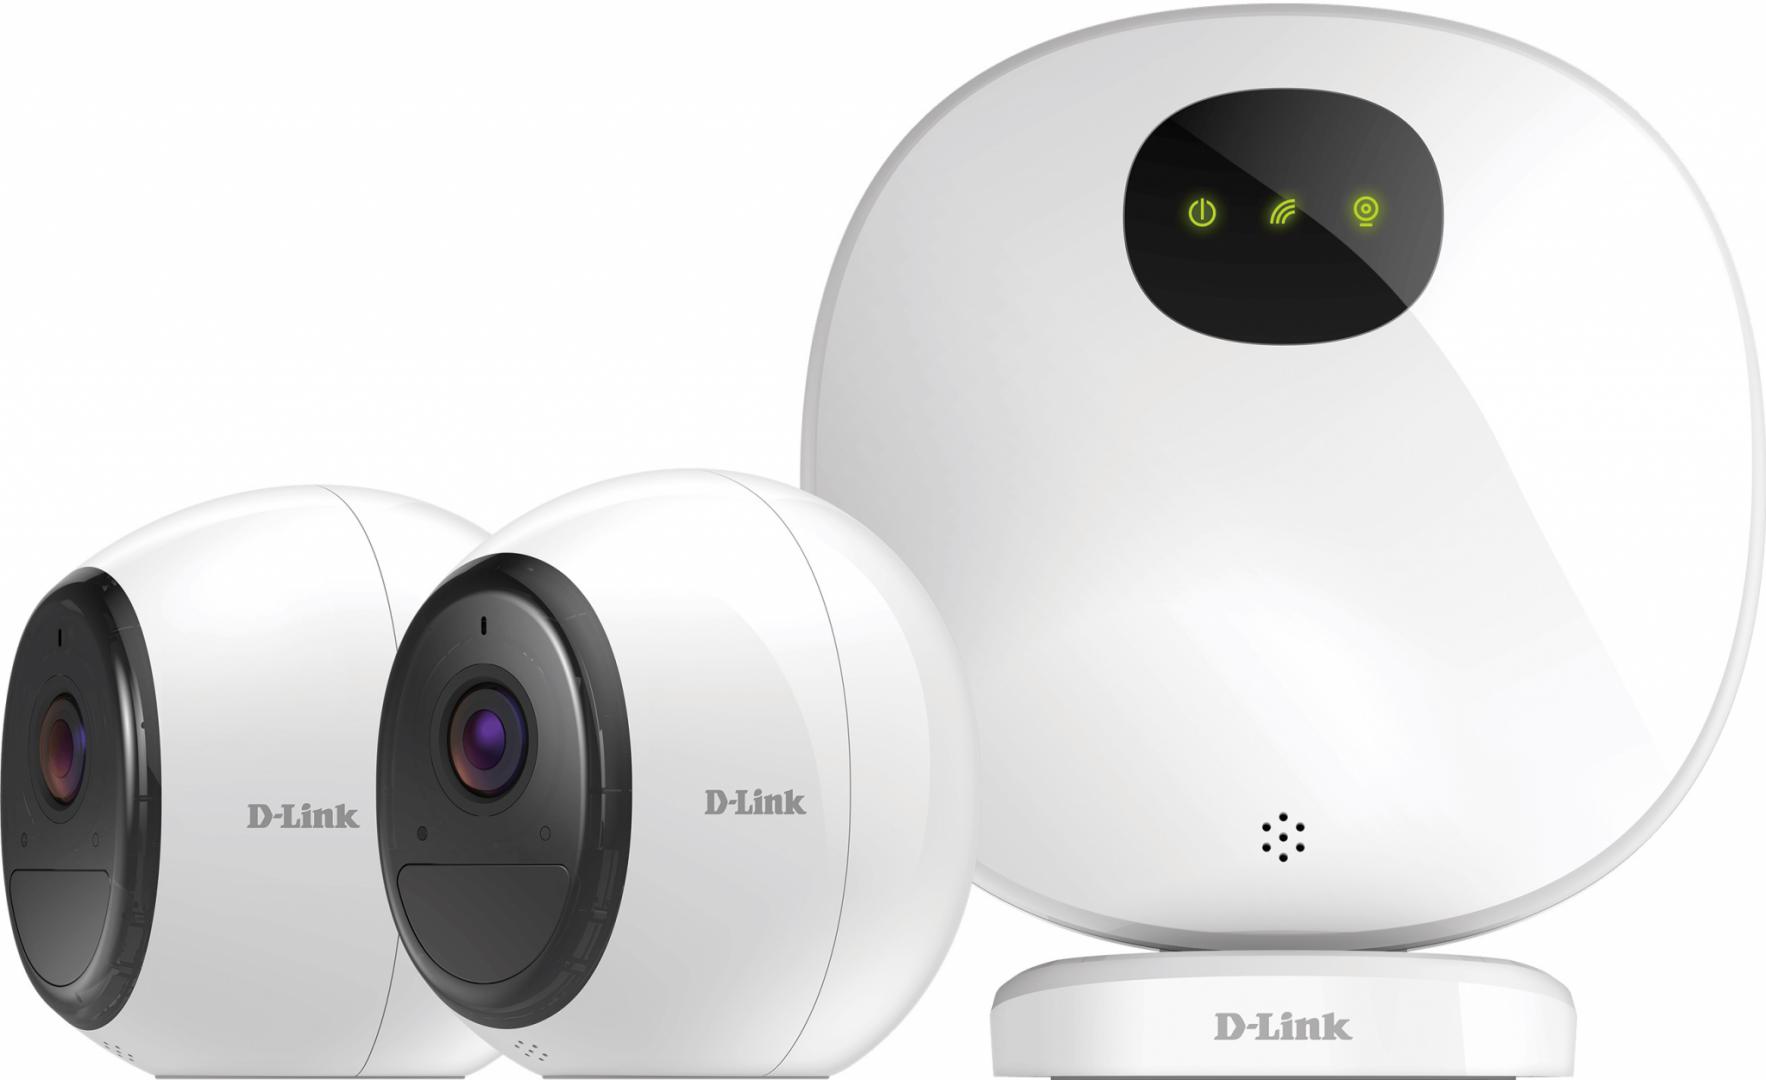 D-link Pro Wire-Free Camera Kit, DCS-2802KT; Indoor Security Camera Hub + 2 Wire-Free Wi-Fi Battery Cameras; Full HD 1080p sensor, 4x digital zoom; Night vision, PIR motion detection, 2-way audio; IP65 weatherproof camera body; Wireless Connectivity: 2.4 GHz: 802.11n wireless/ 866 MHz for